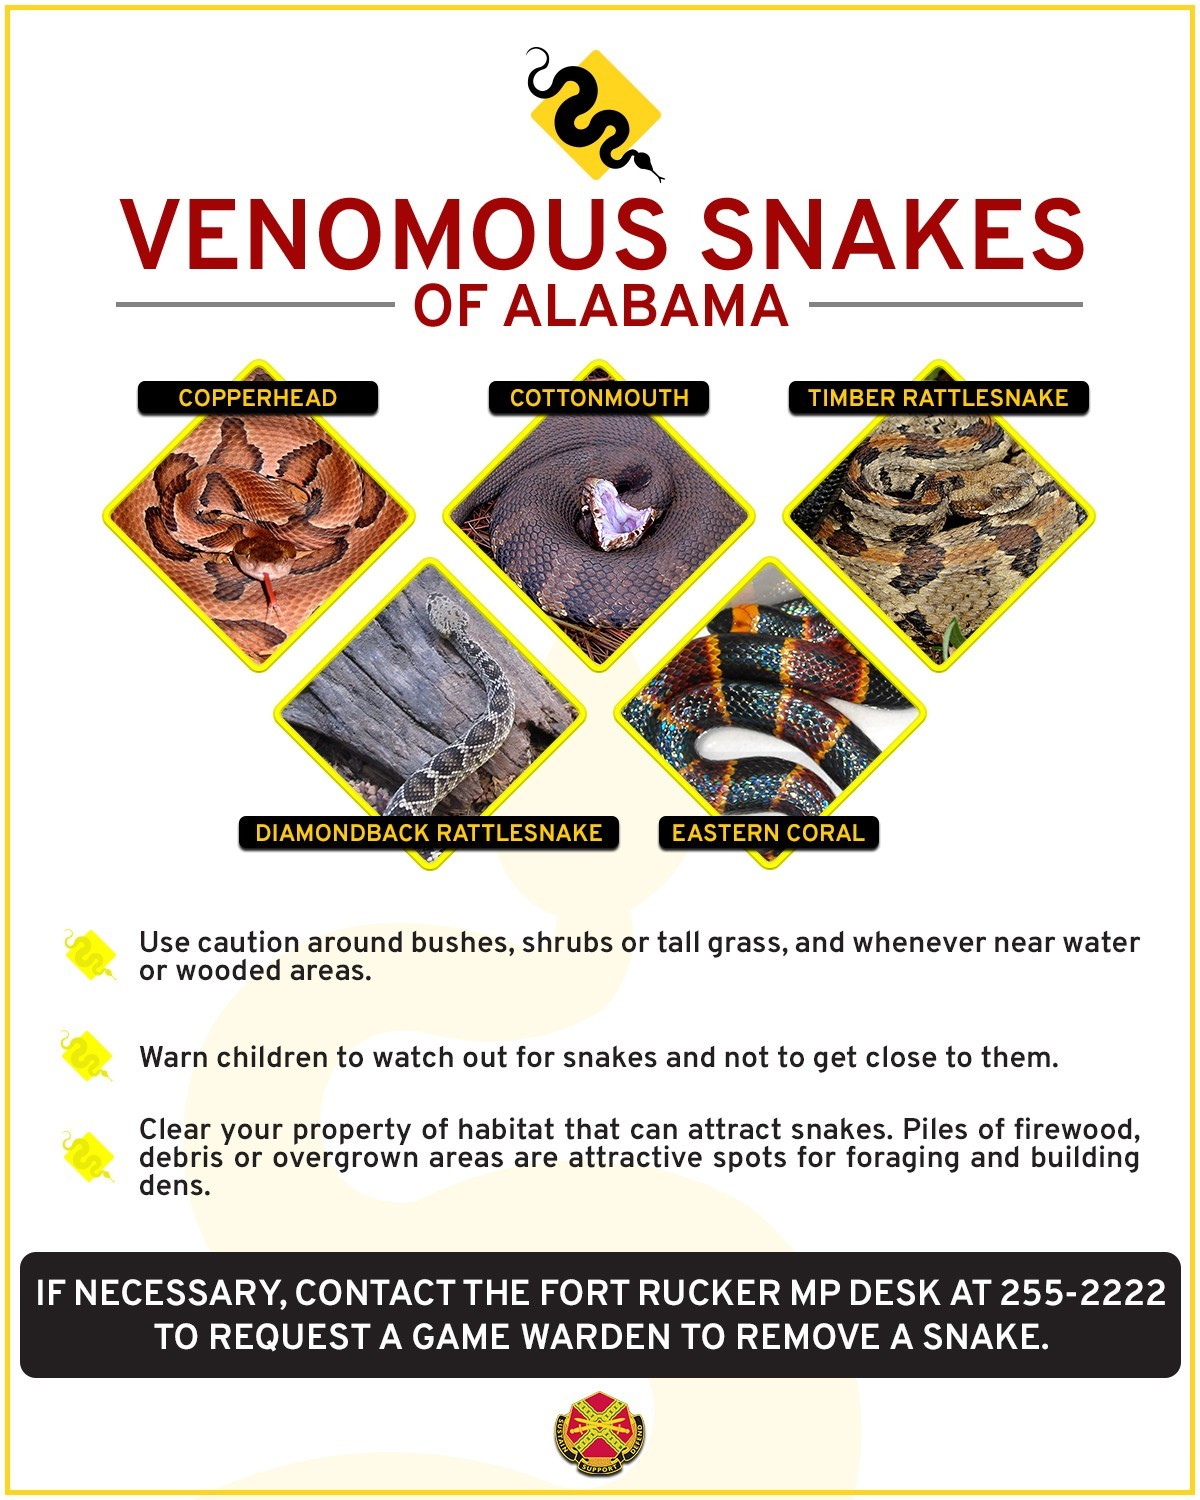 What to Do If You Encounter a Rattlesnake While Hiking